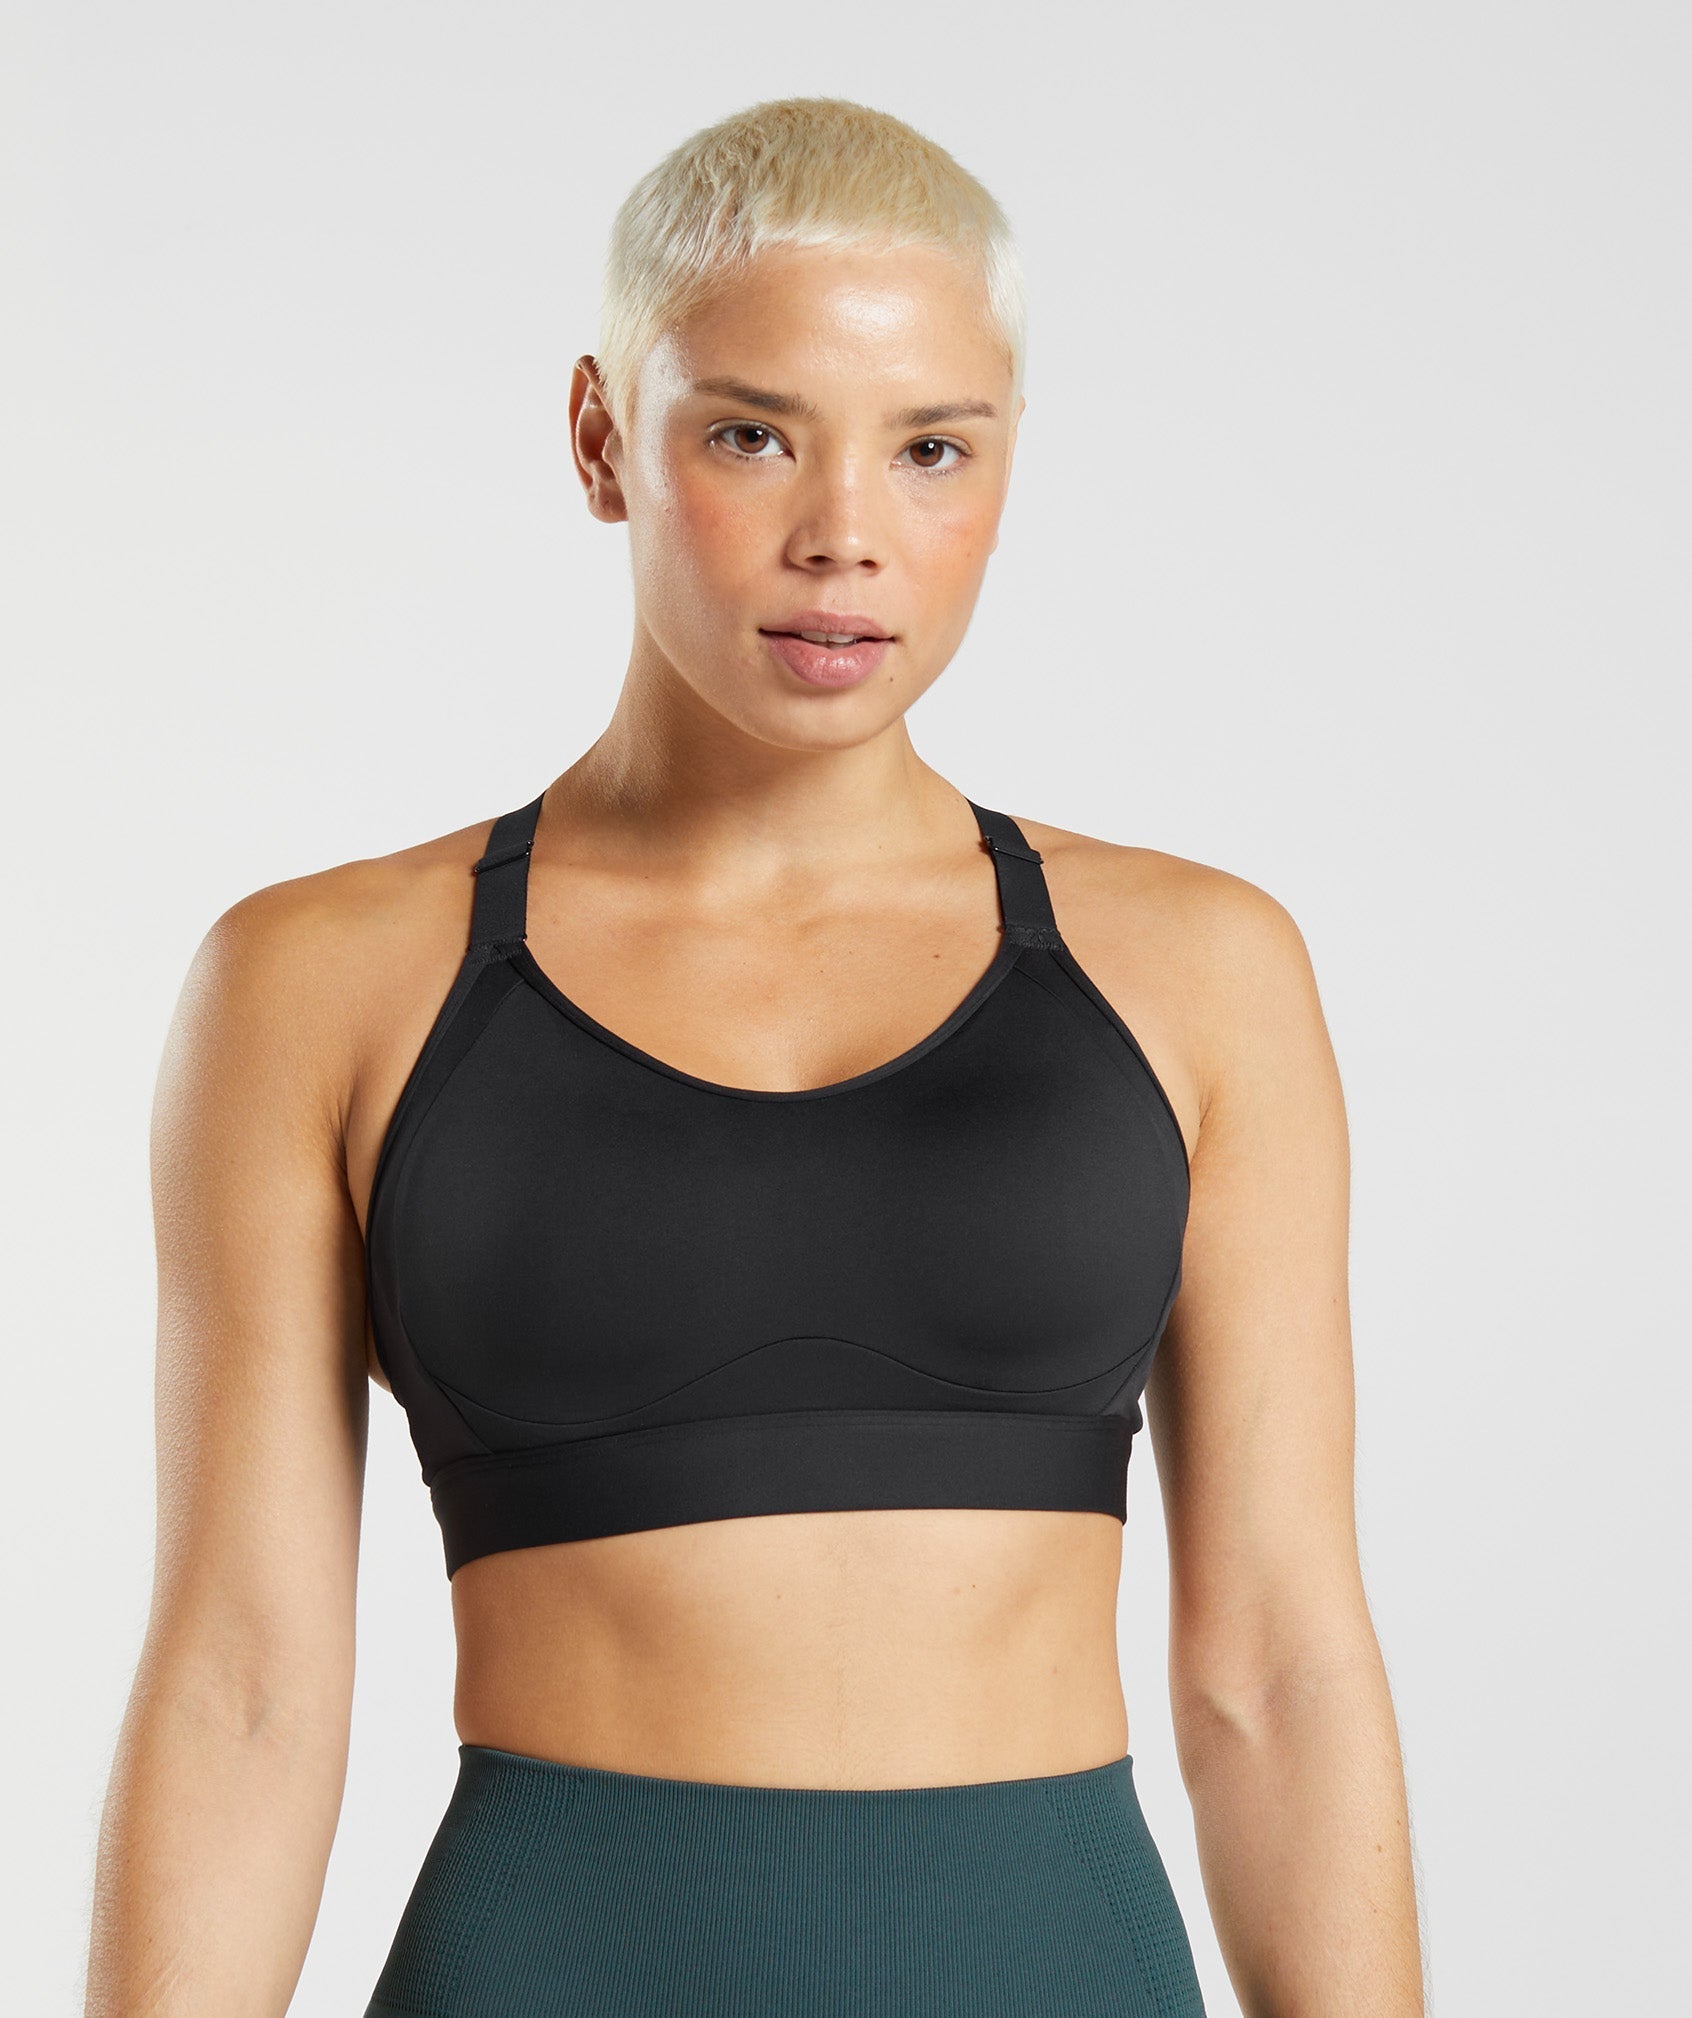 New sports bra being released by Gymshark. Seriously no one with anything  above a B cup could wear this bra as a sports bra… (I wouldn't even wear  this and i'm a